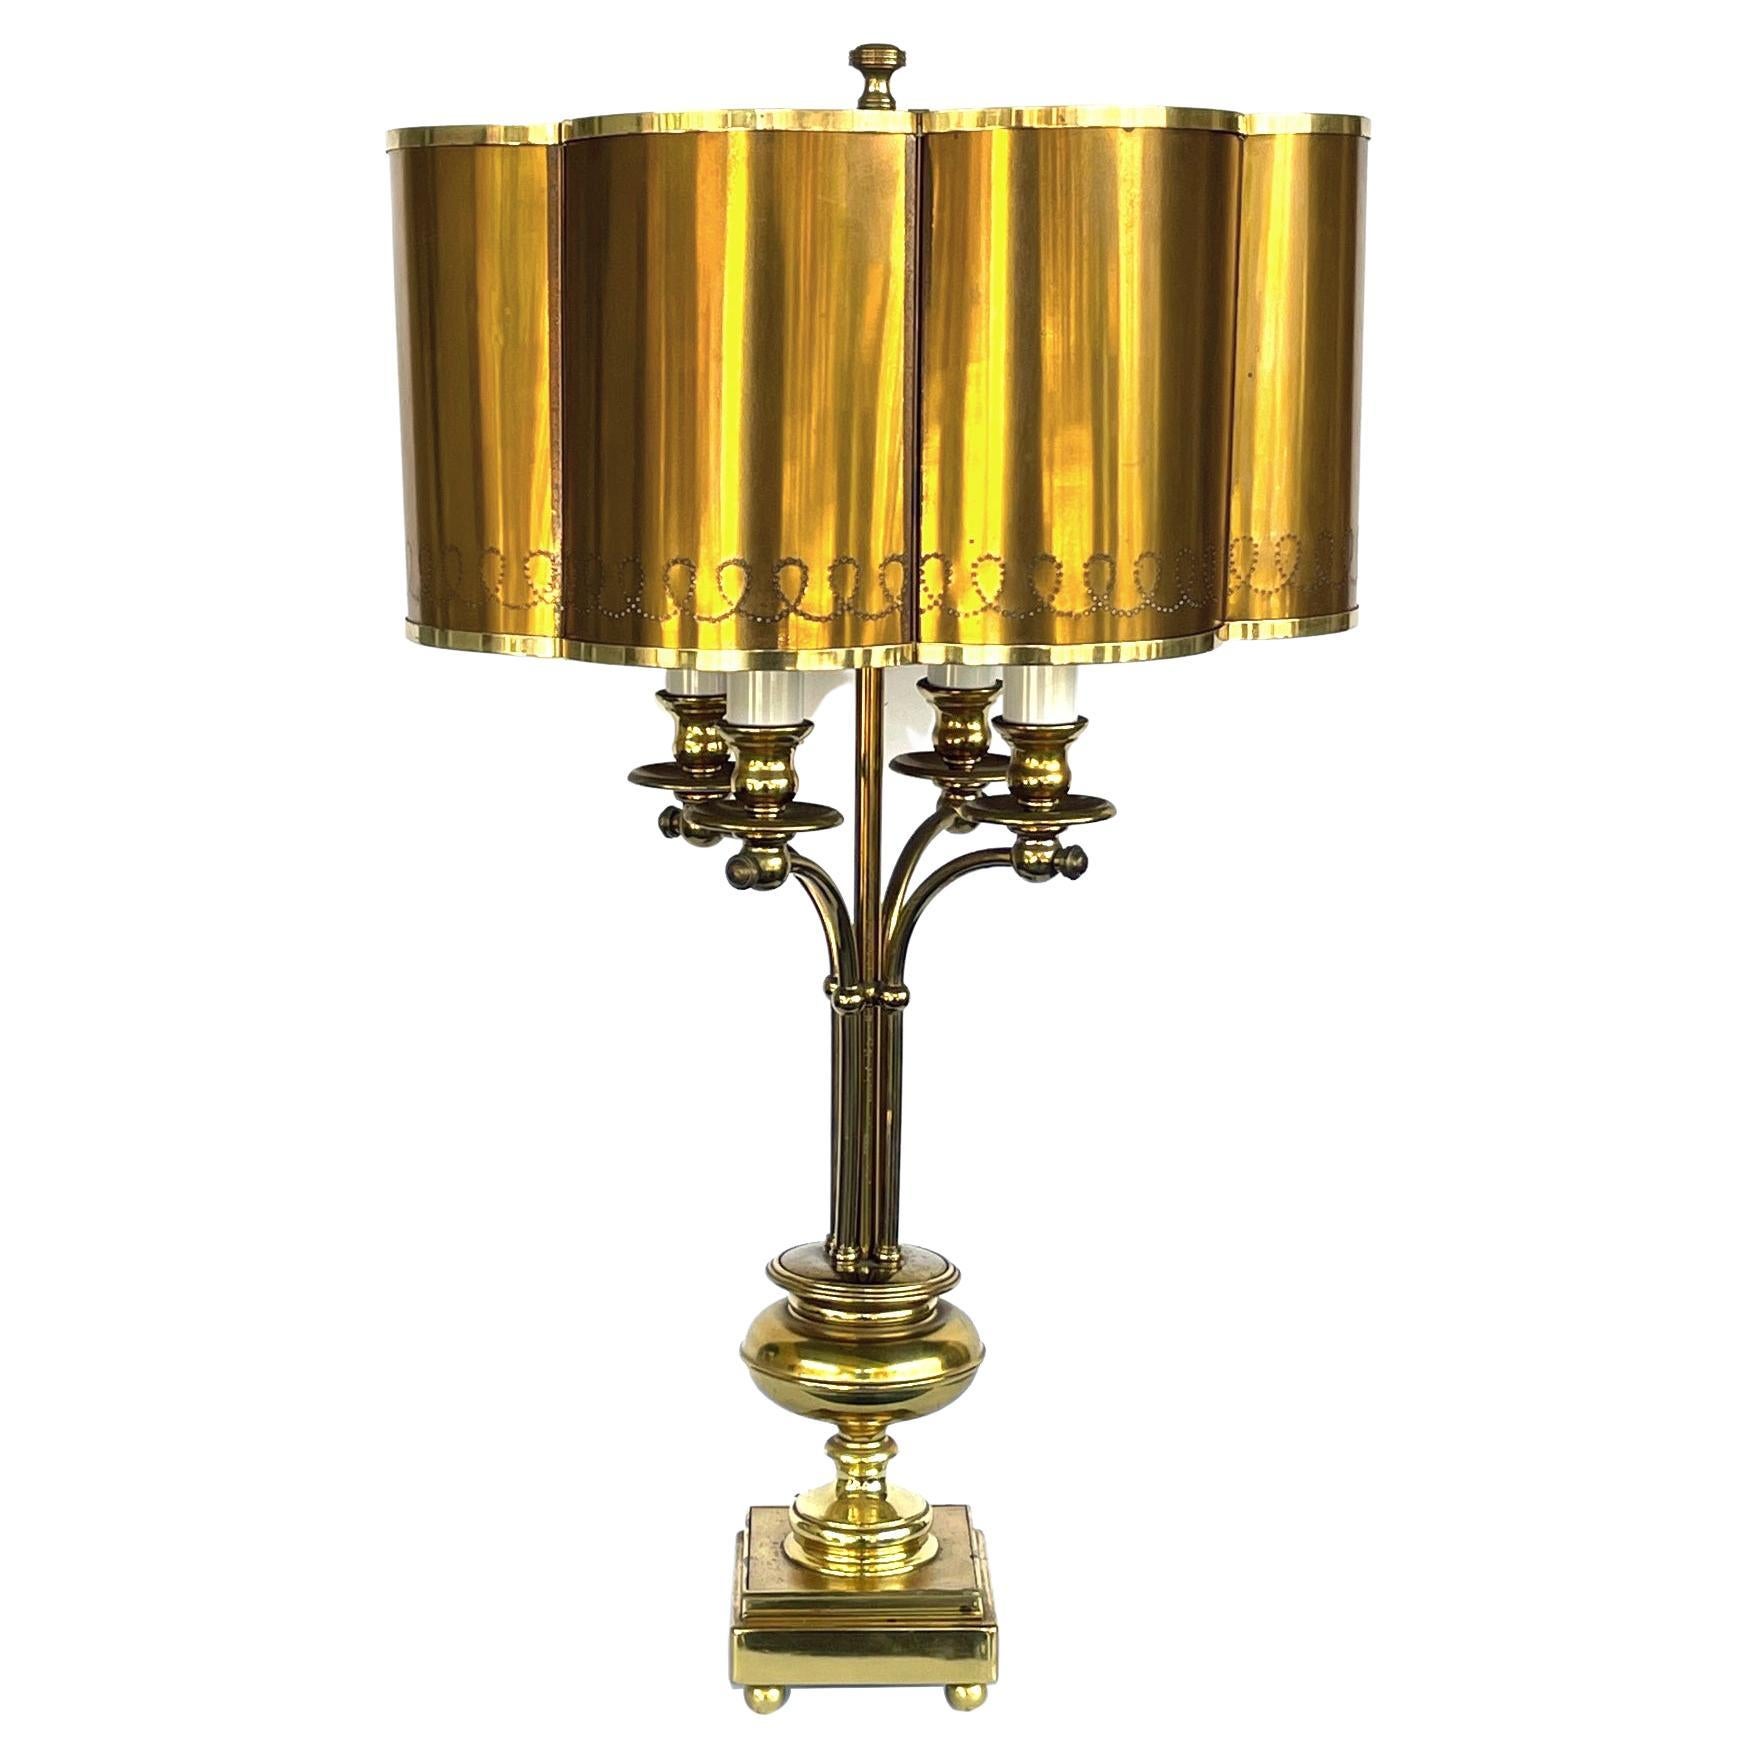 French Brass 4-Light Bouillotte Lamp with Original Scalloped Brass Shade